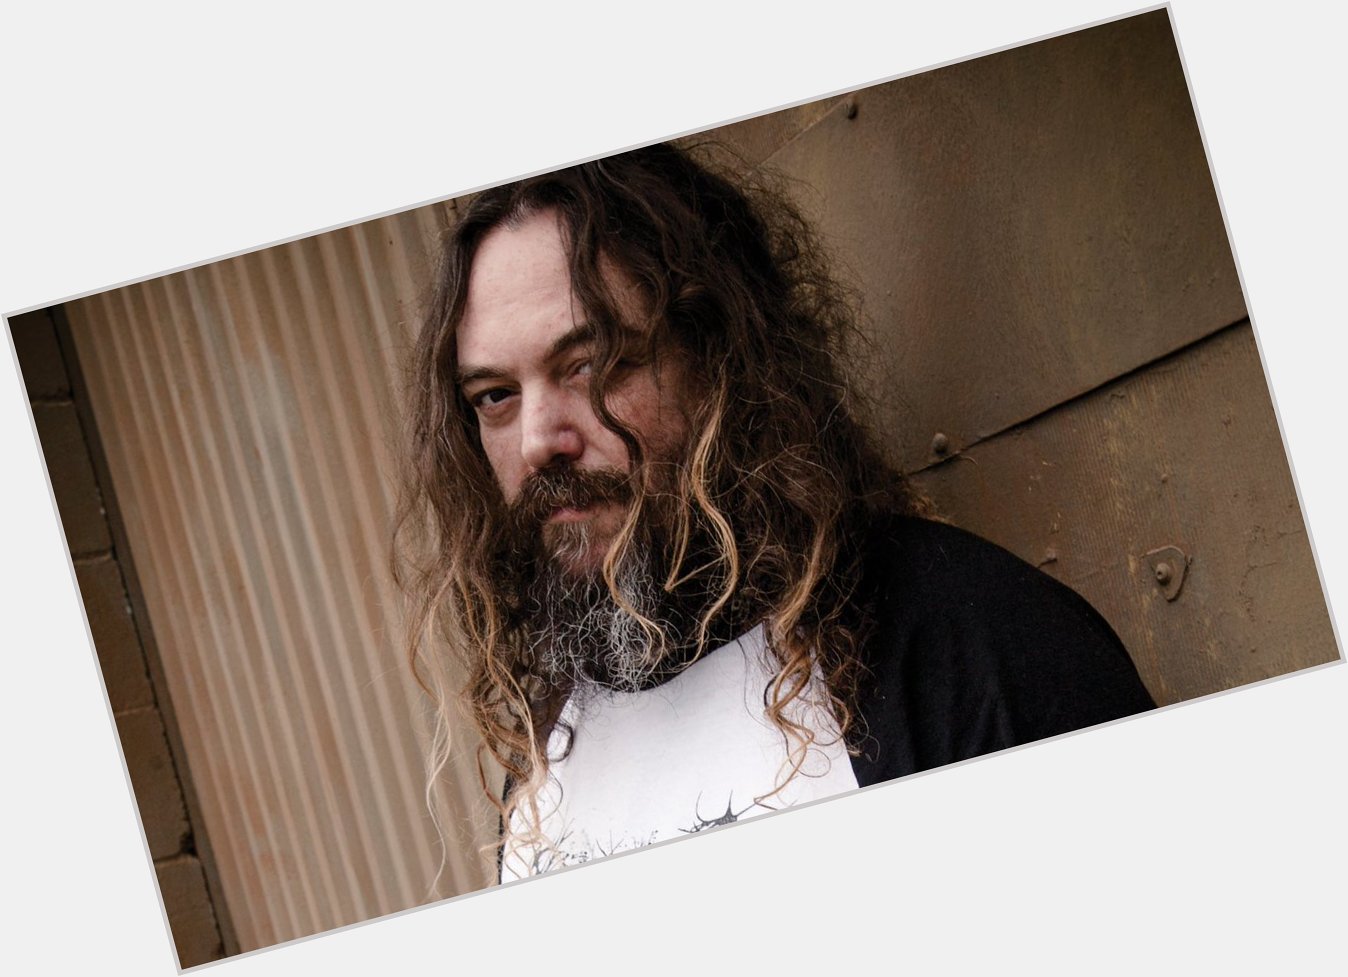 Happy 50th birthday to Max Cavalera! In celebration, we ask you all to JUMPDAFUCKUP! 